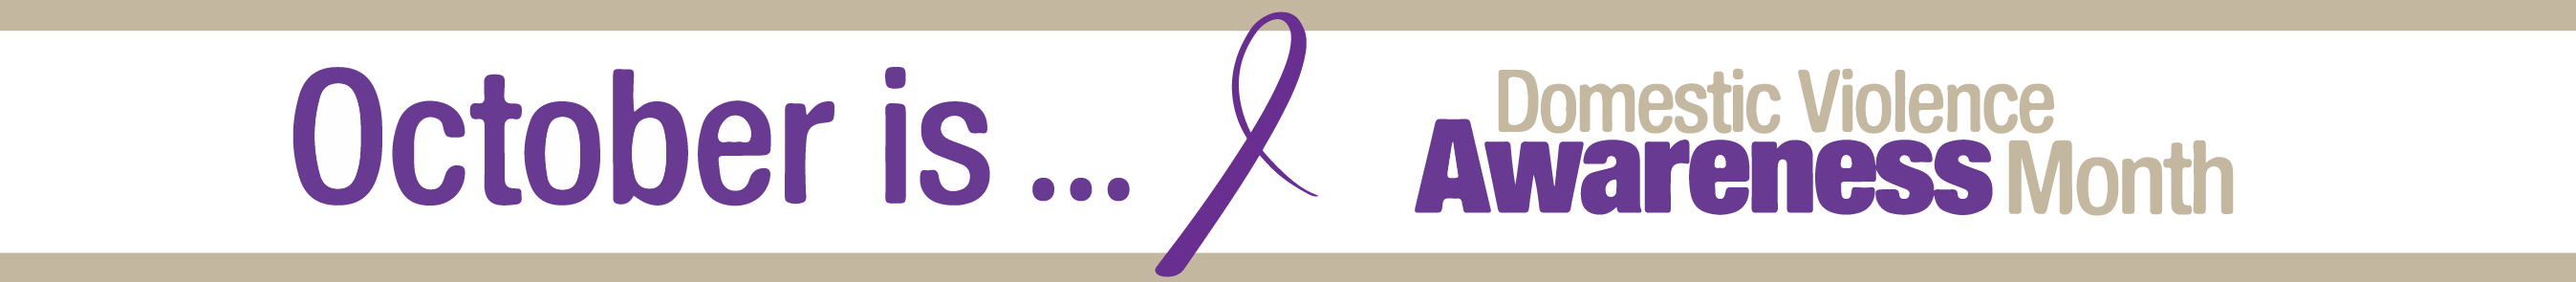 White banner with the text October is... and image of a purple ribon and then the text Domestic Violence Awareness Month